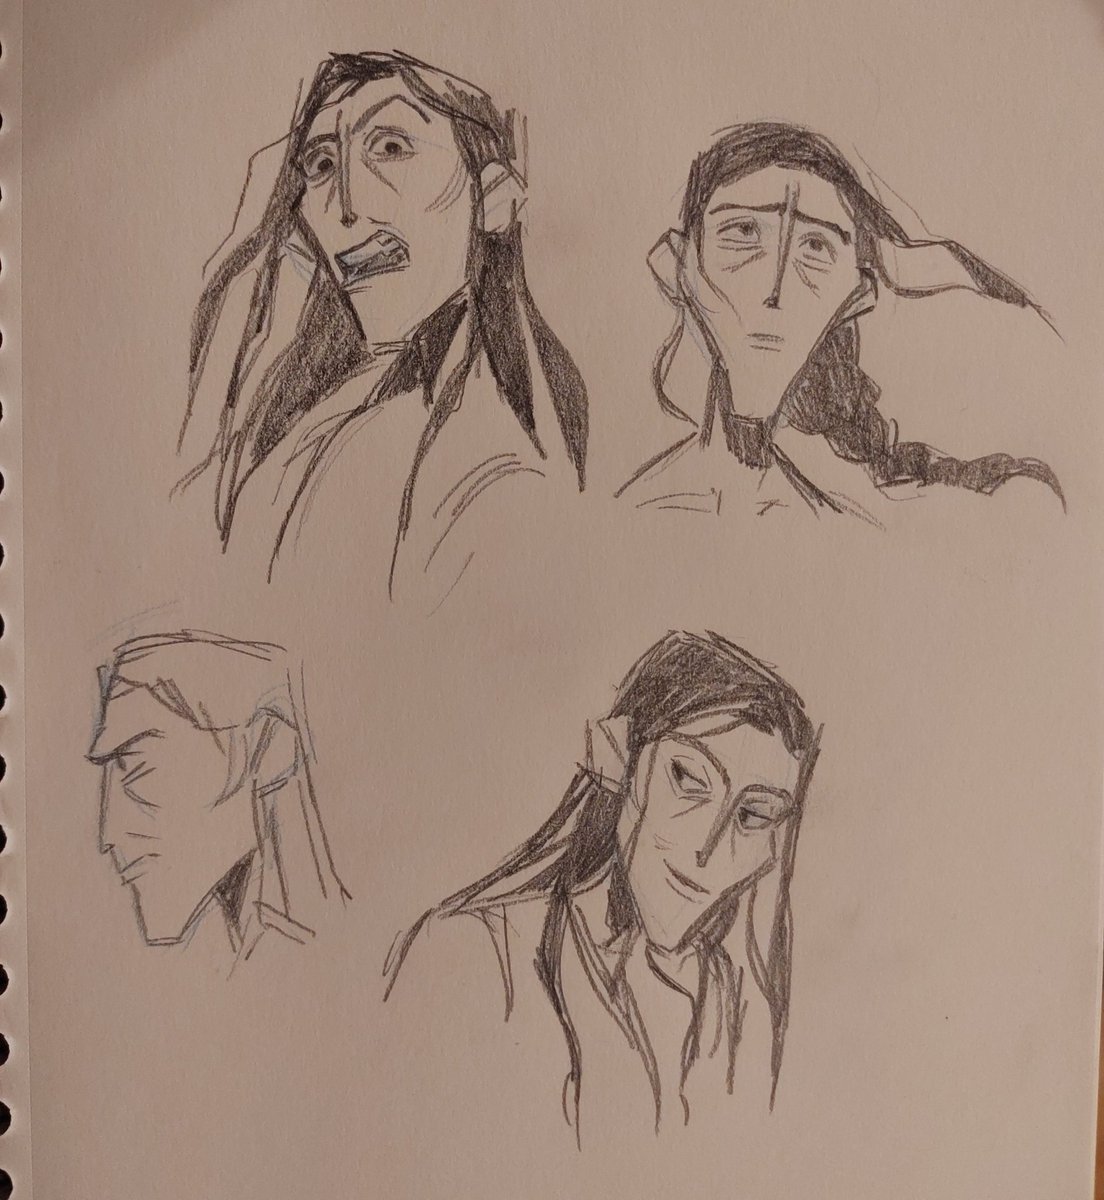 plus some leinth expressions 